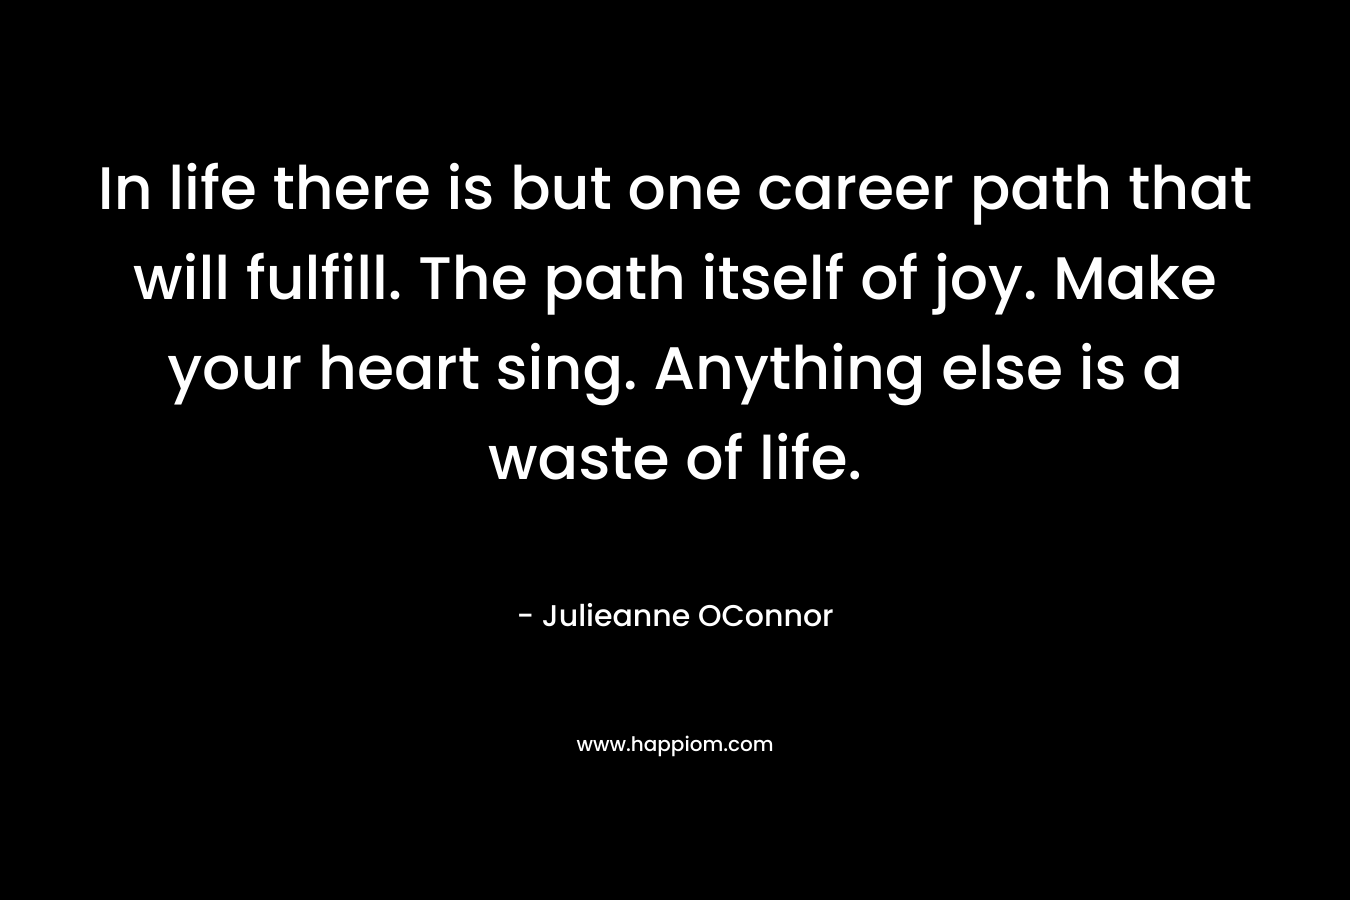 In life there is but one career path that will fulfill. The path itself of joy. Make your heart sing. Anything else is a waste of life.